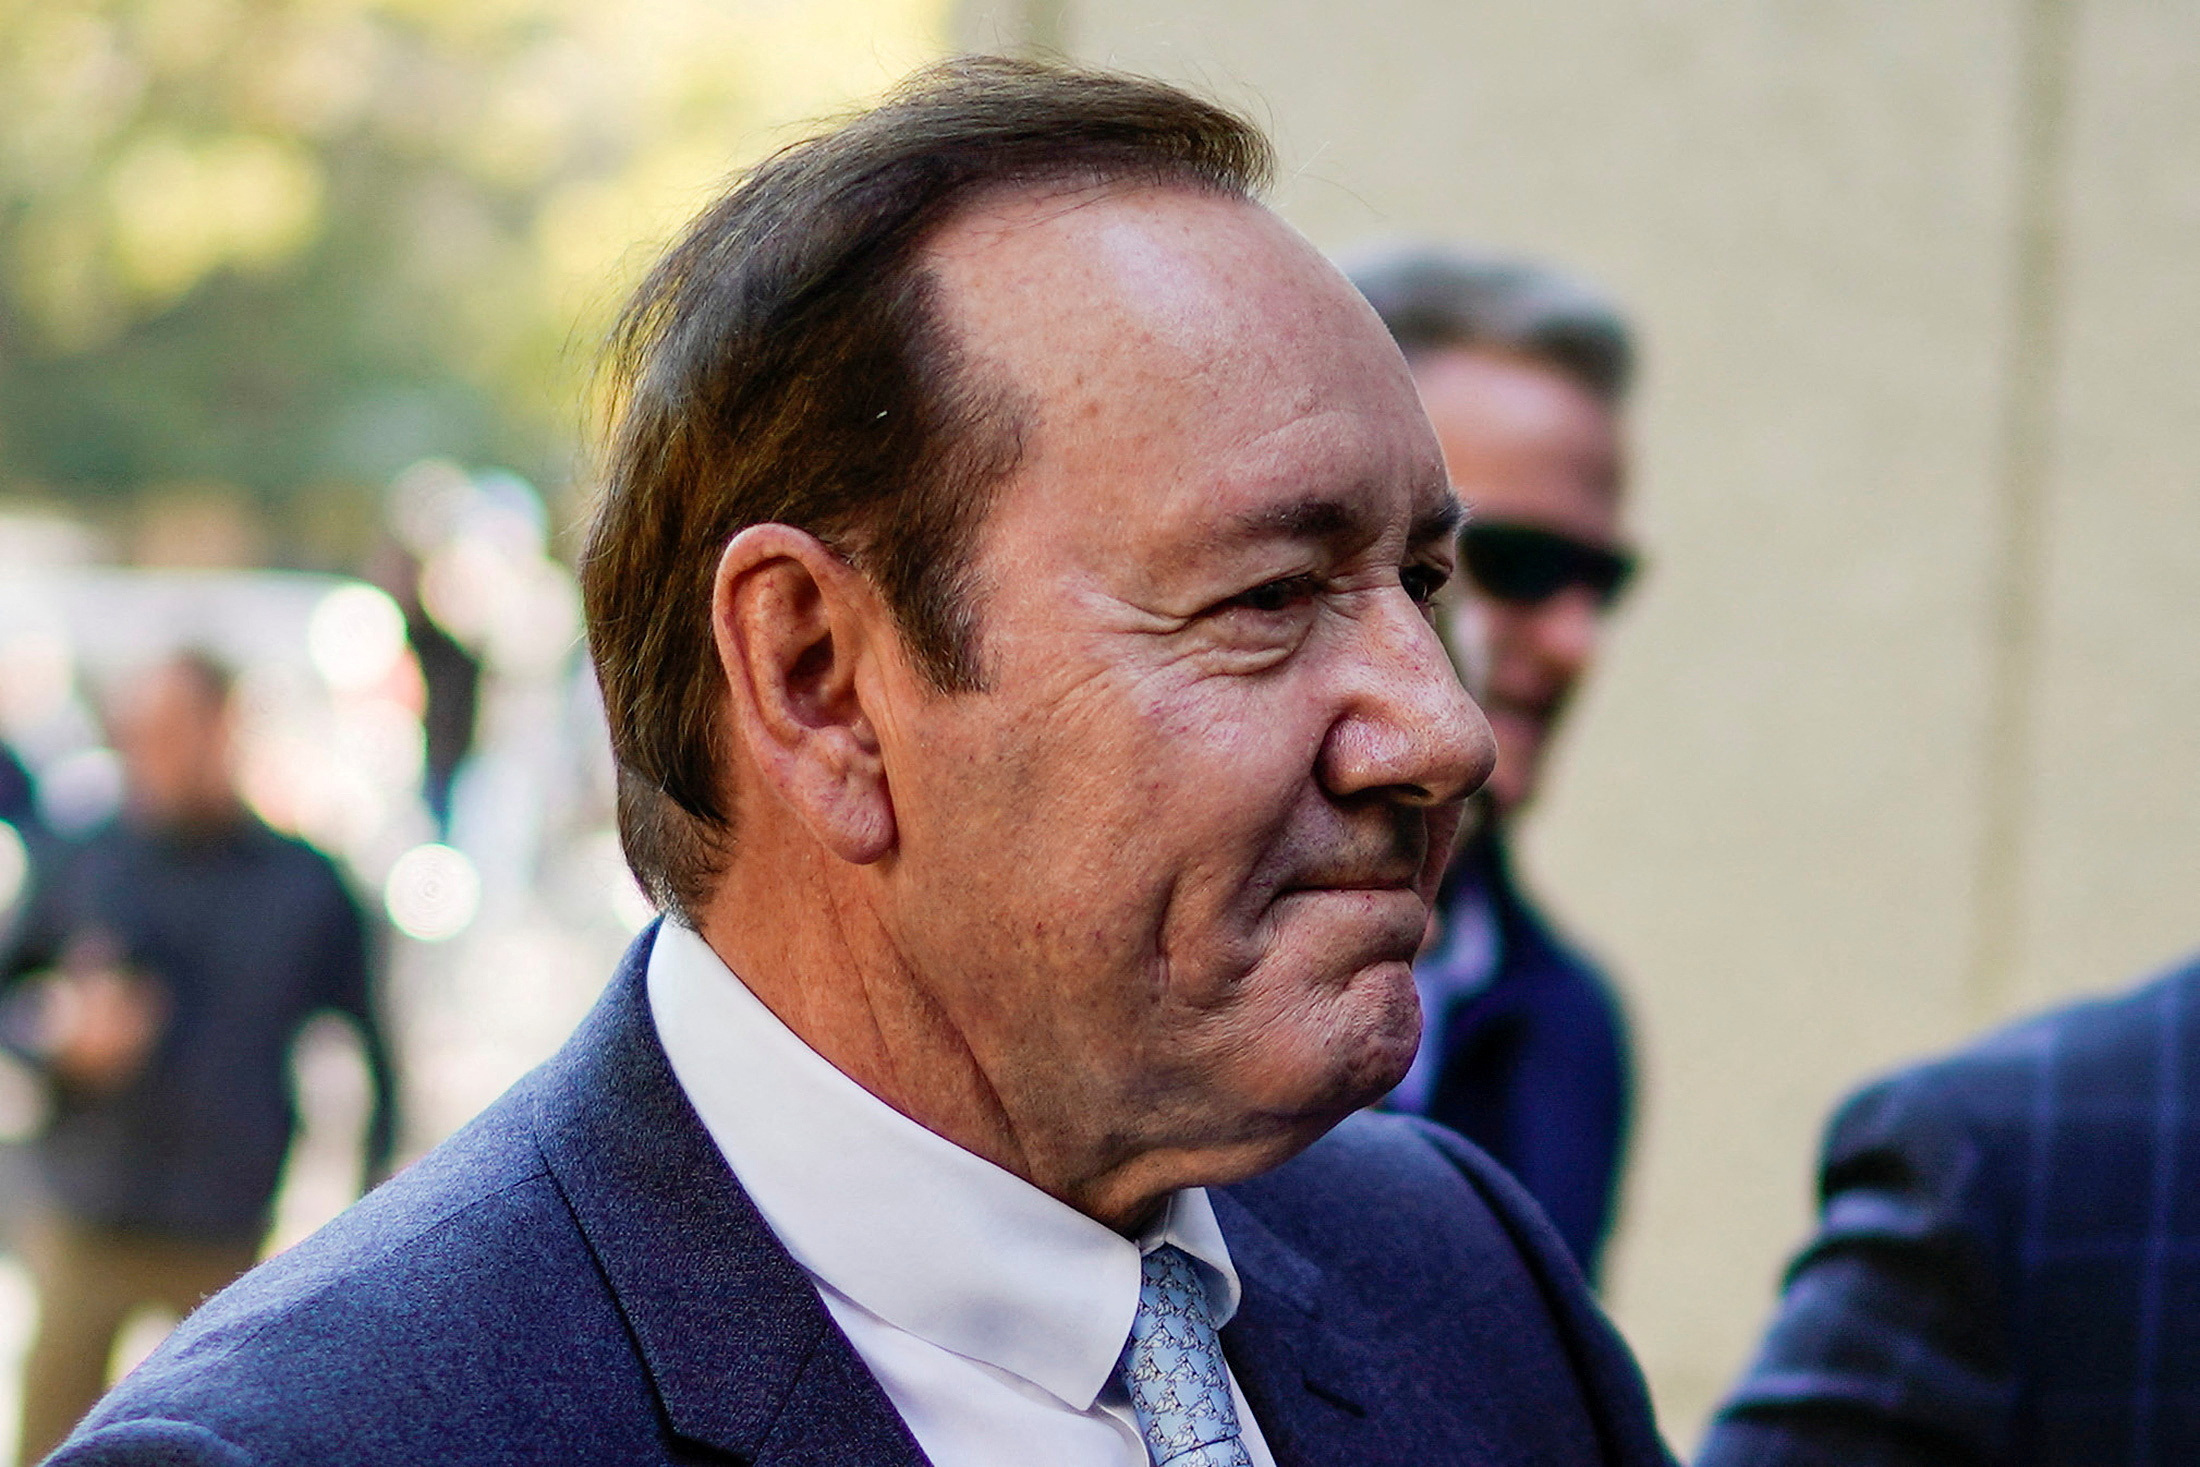 Jury selection to begin in Kevin Spacey civil sex abuse trial